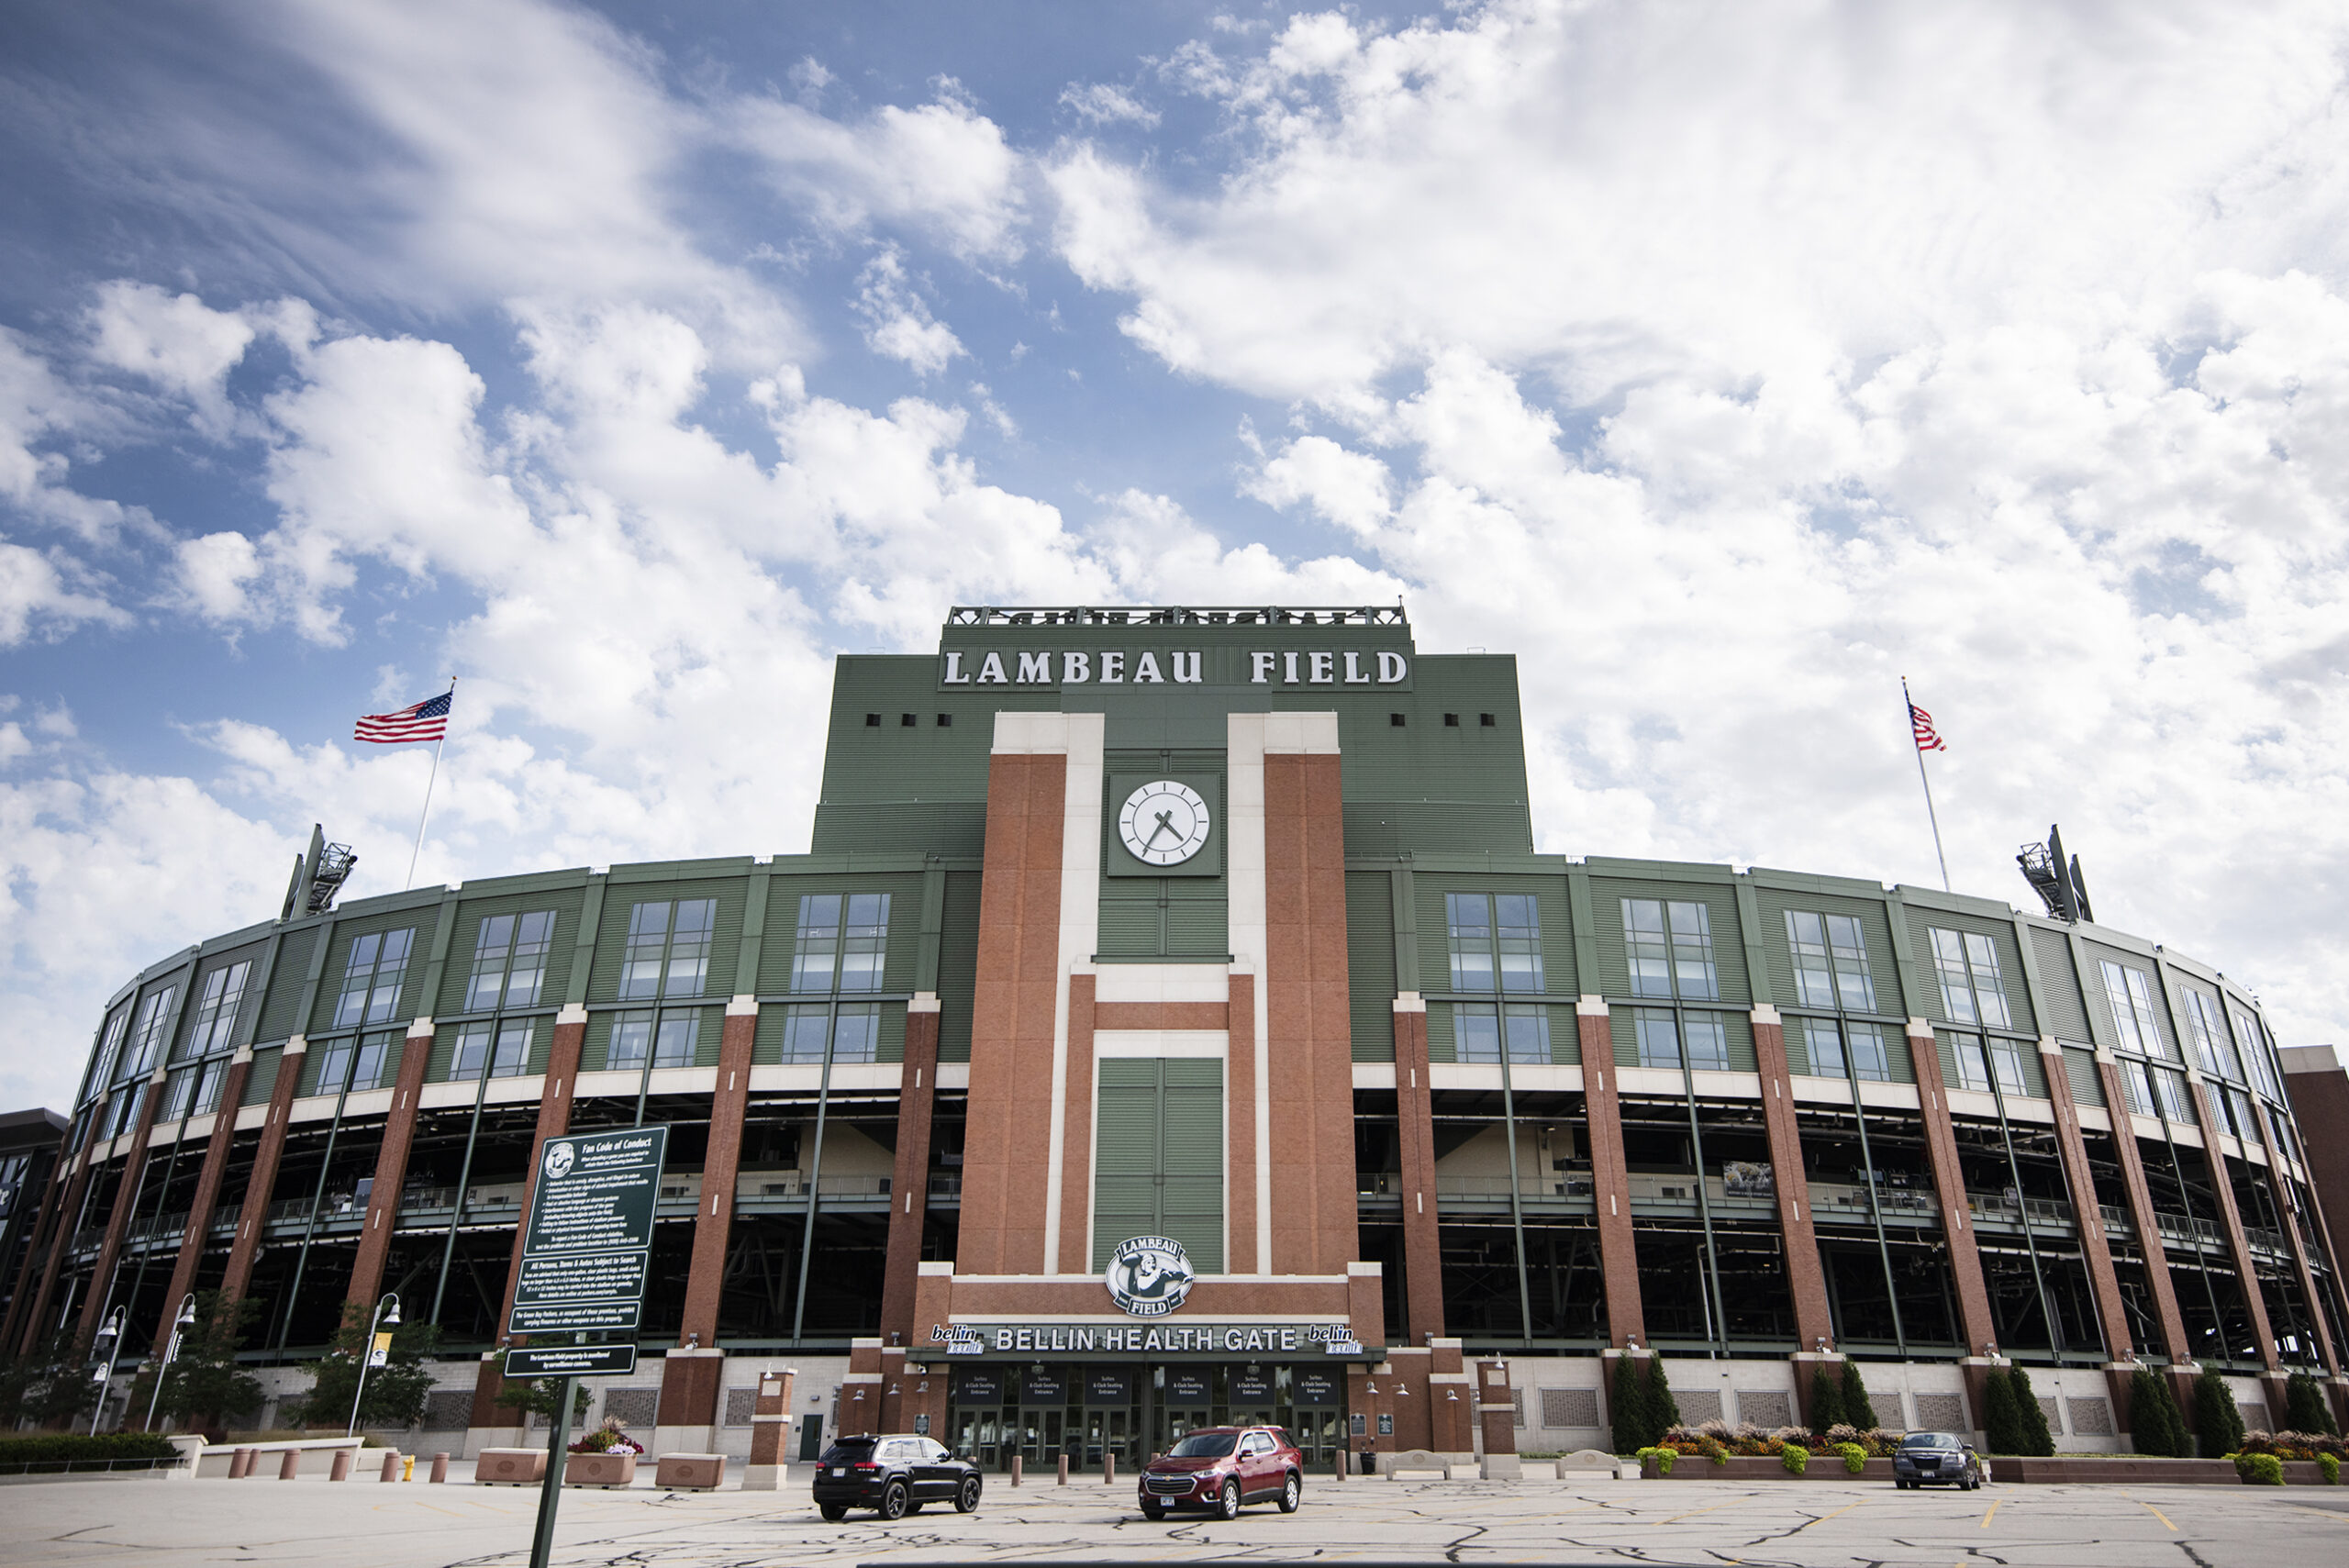 Service workers at Lambeau Field overwhelmingly vote in favor of unionizing